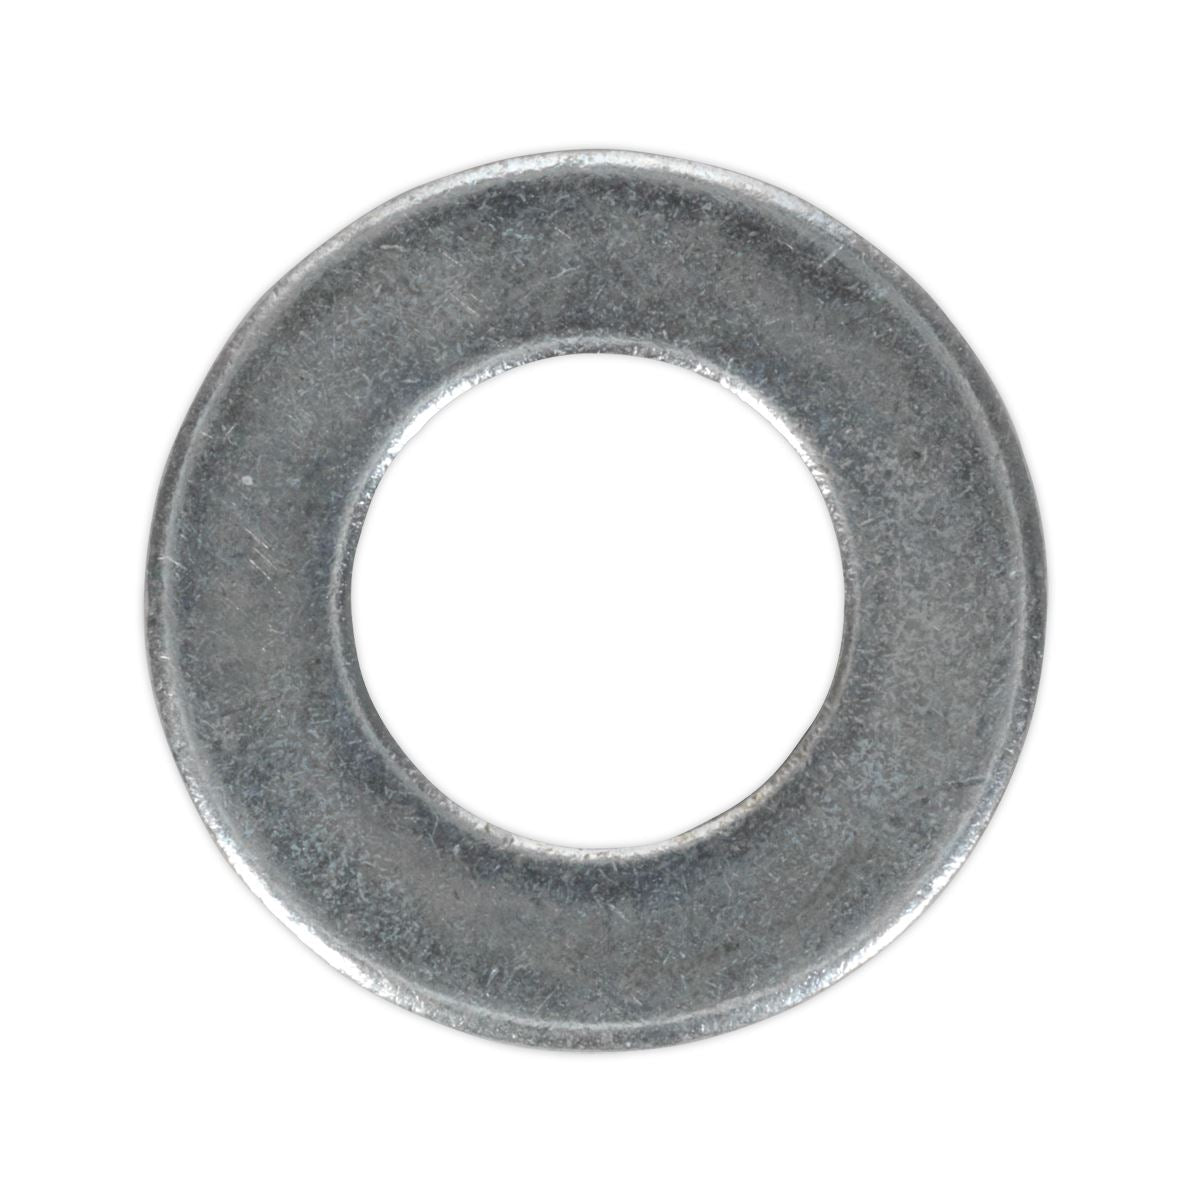 Sealey 100 Pack M12 x 24mm Zinc Flat Washer DIN 125 Form A